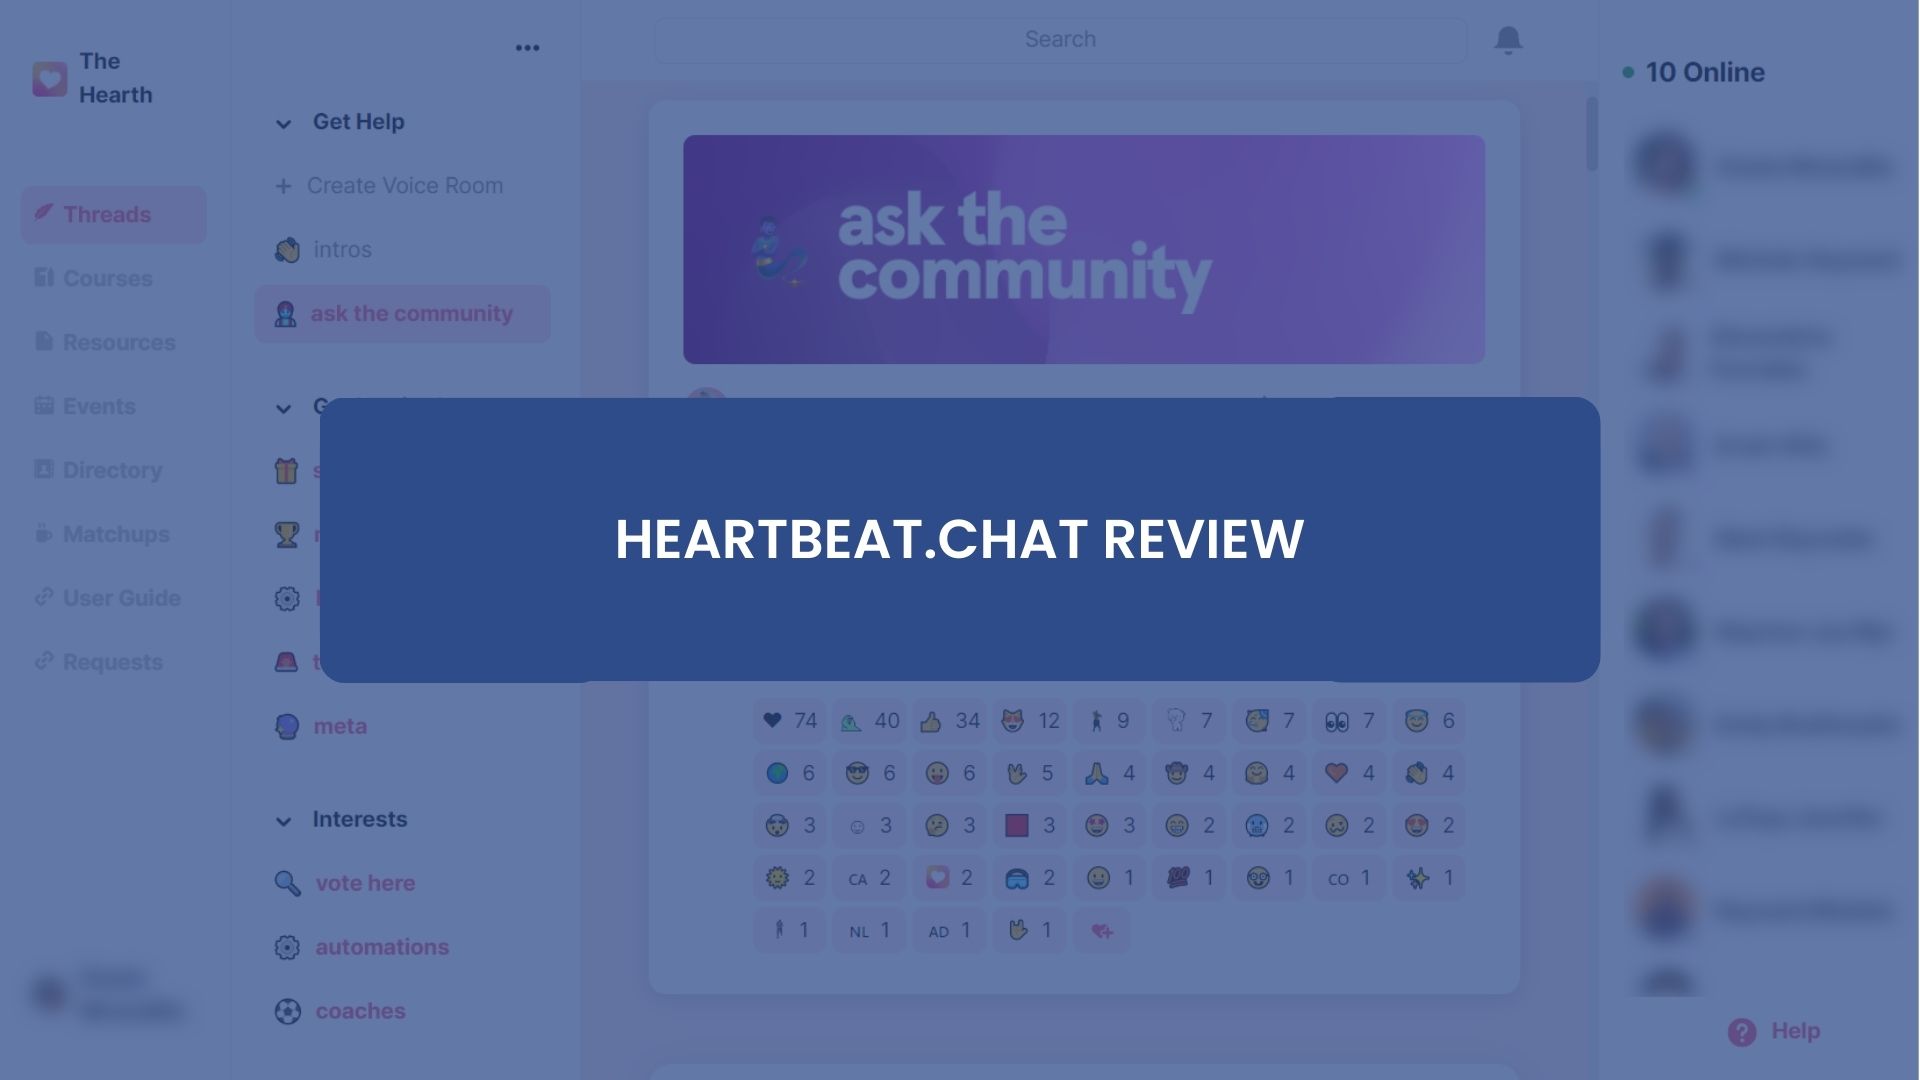 Heartbeat.chat Review